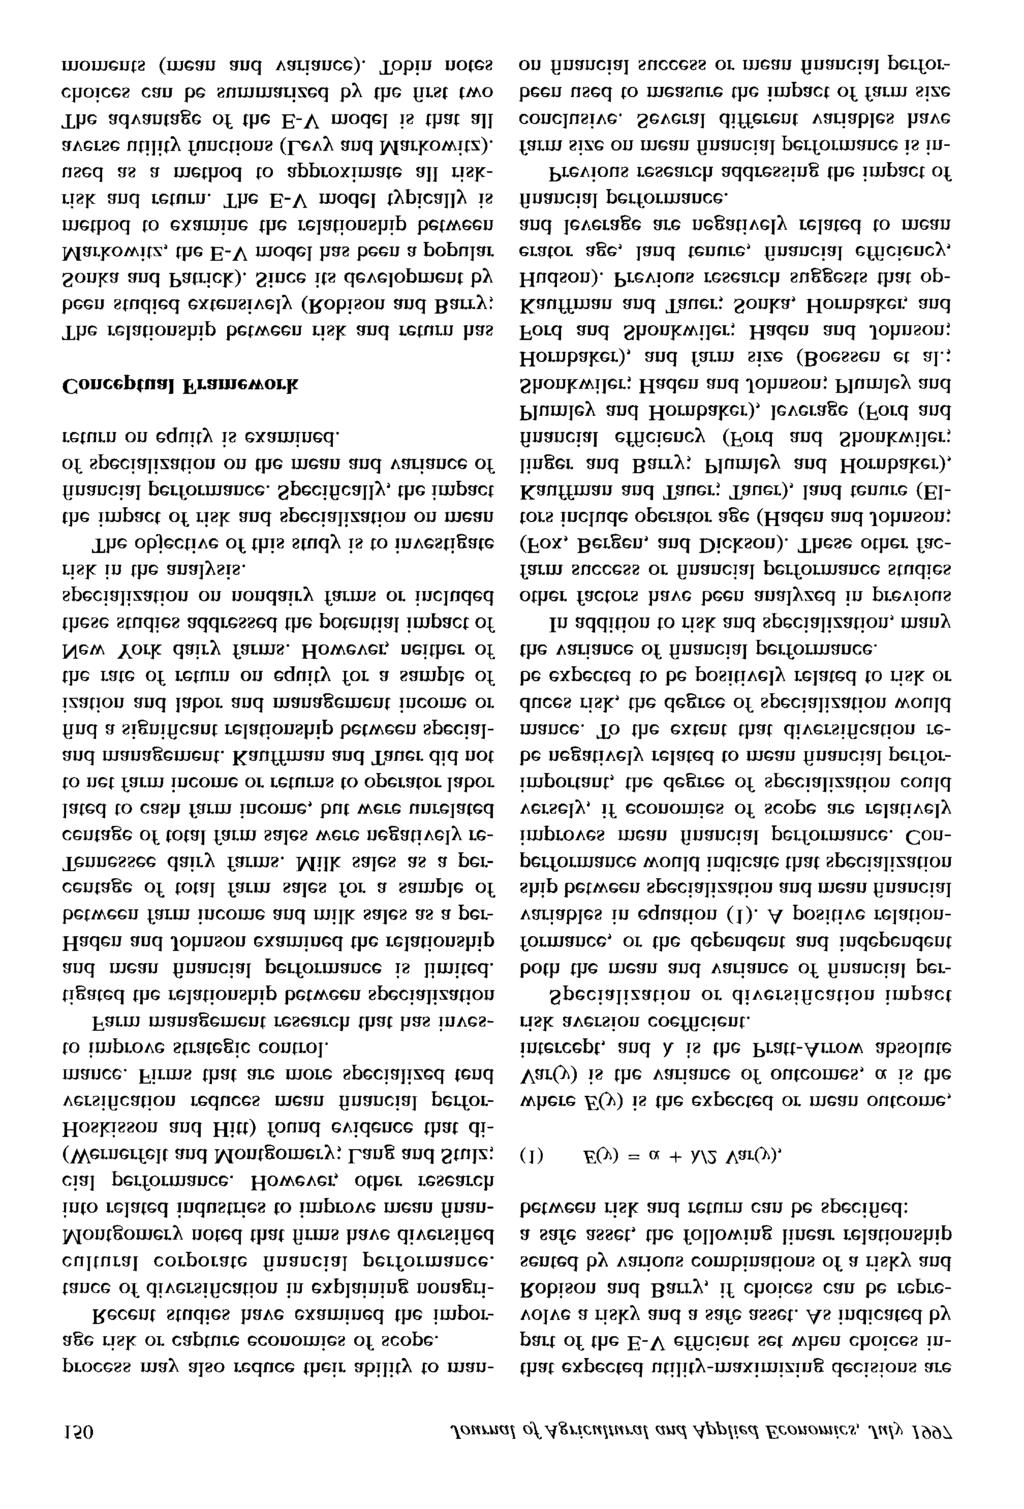 150 Journal of Agricultural and Applied Economics, July 1997 process may also reduce their ability to manage risk or capture economies of scope.